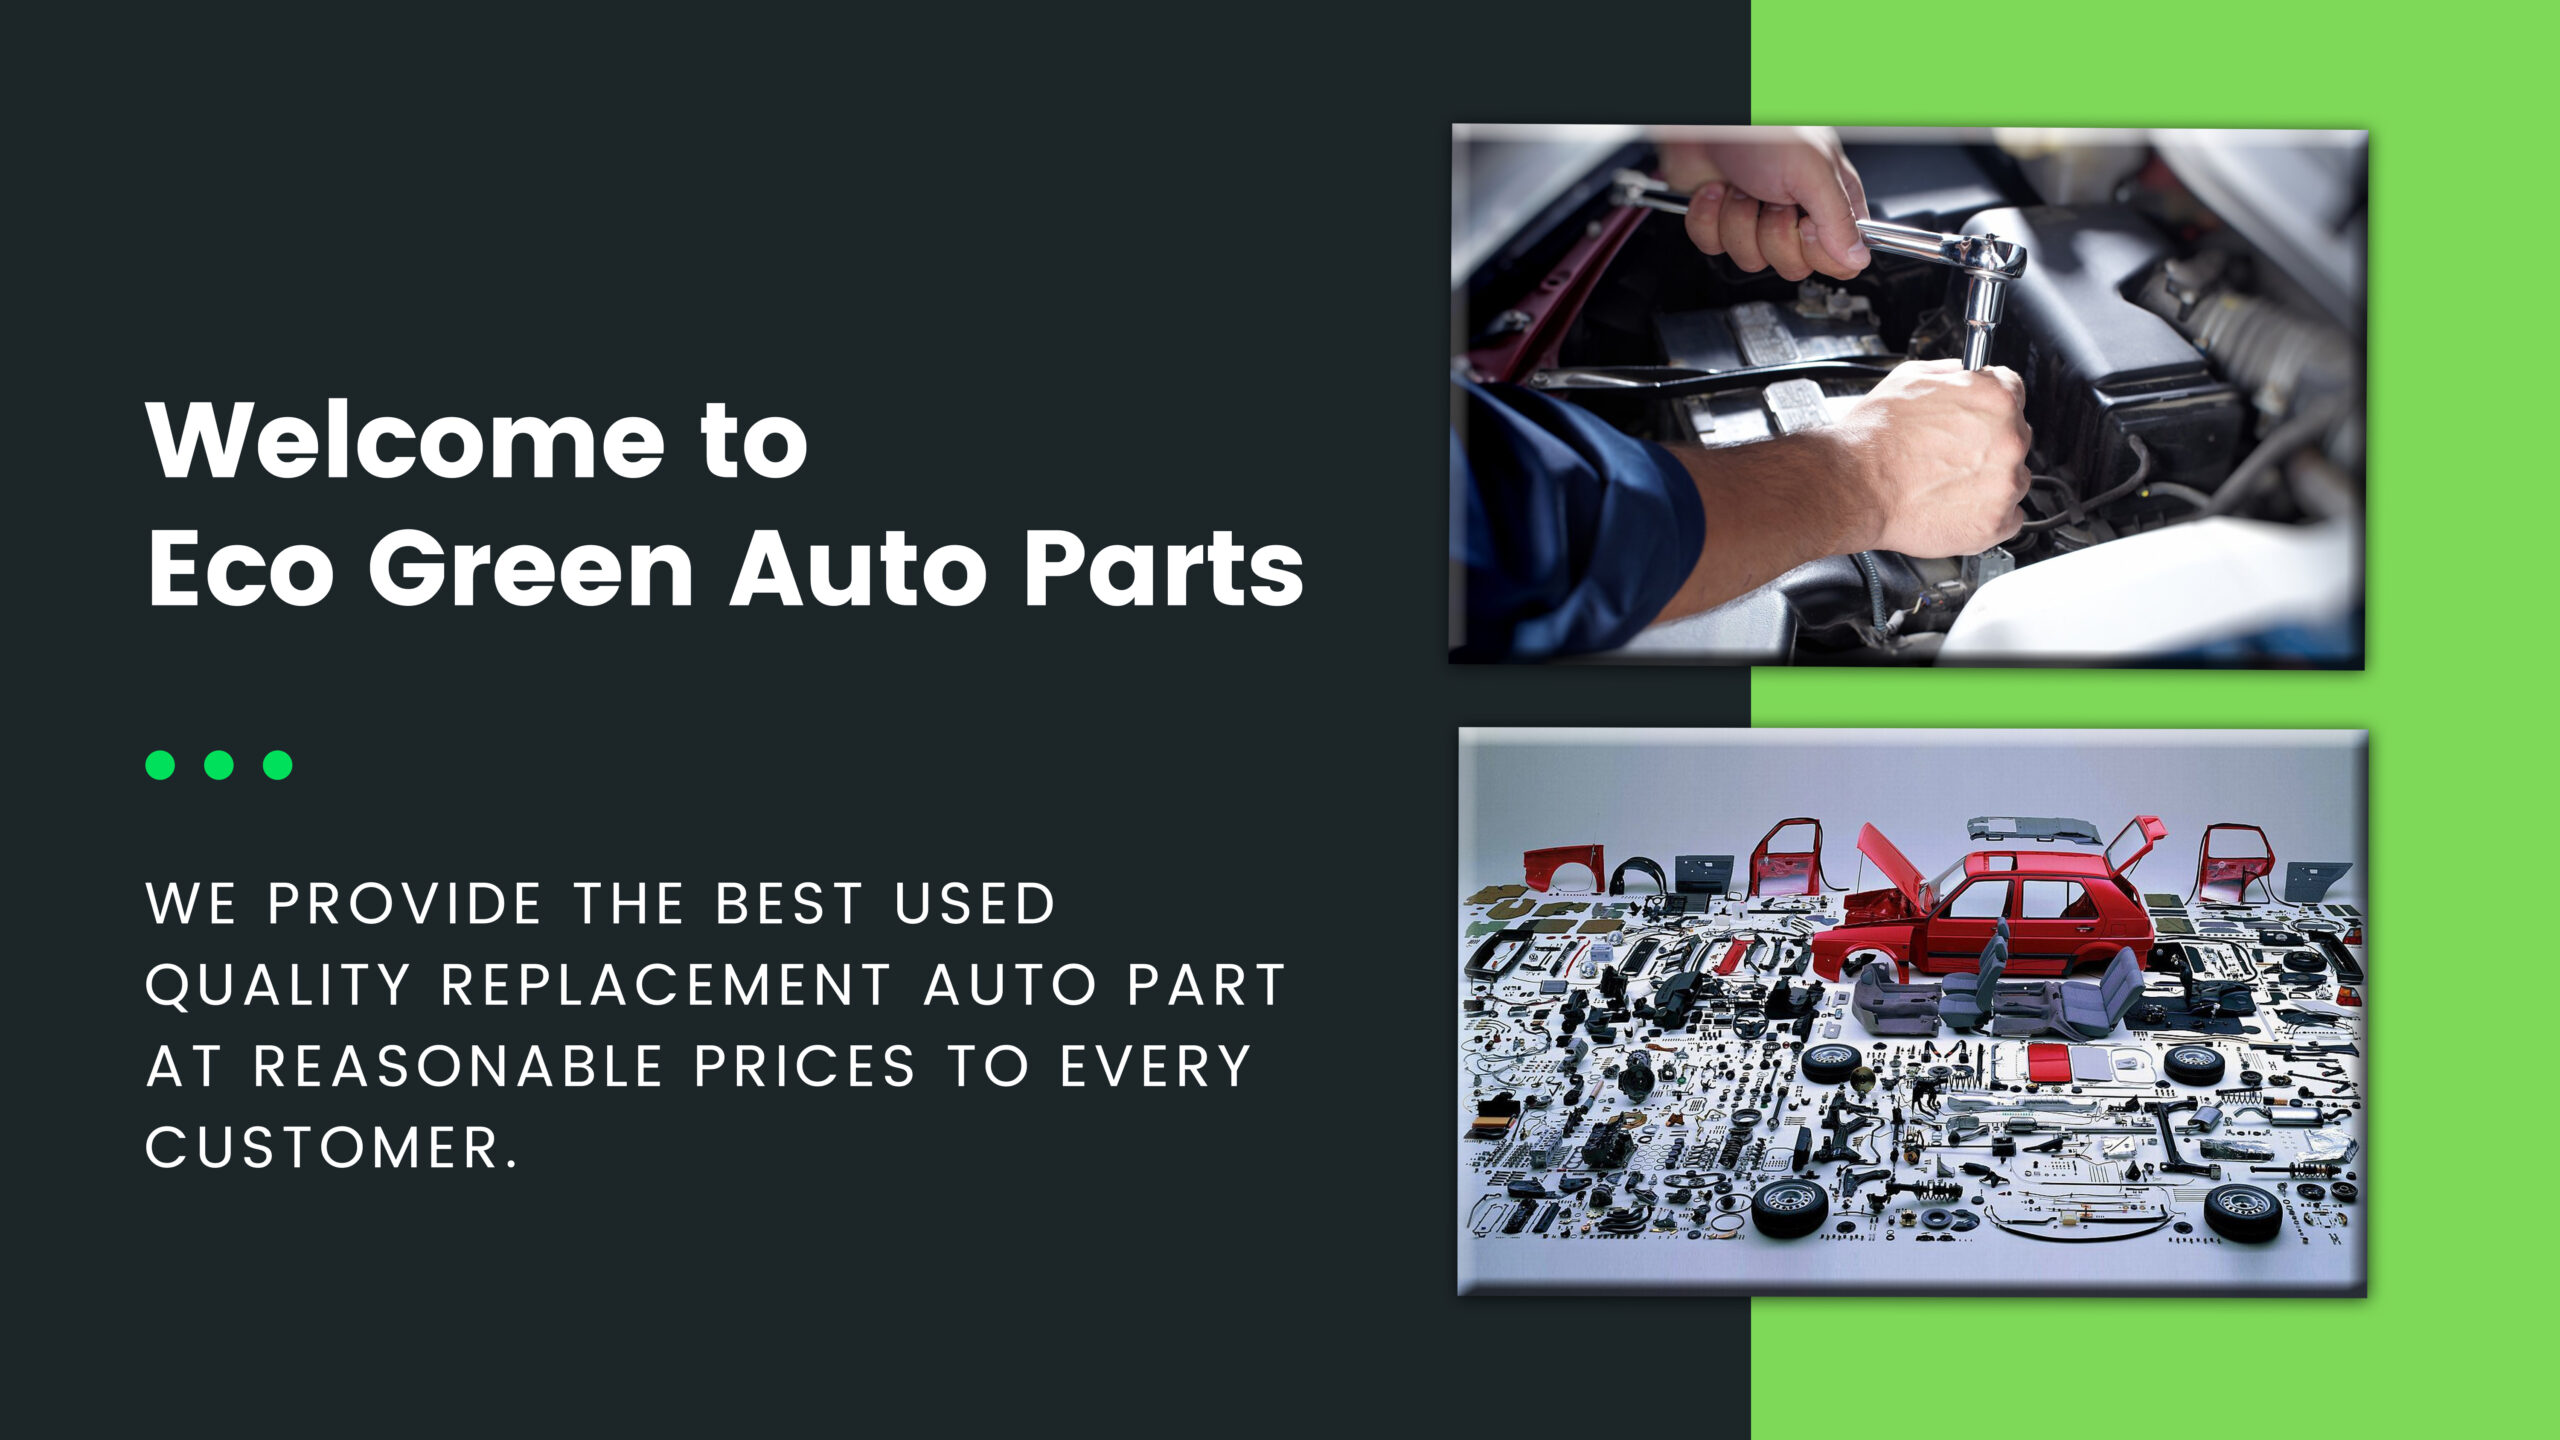 Eco Green Auto Parts: We provide the best used quality replacement auto part at reasonable prices to every customer